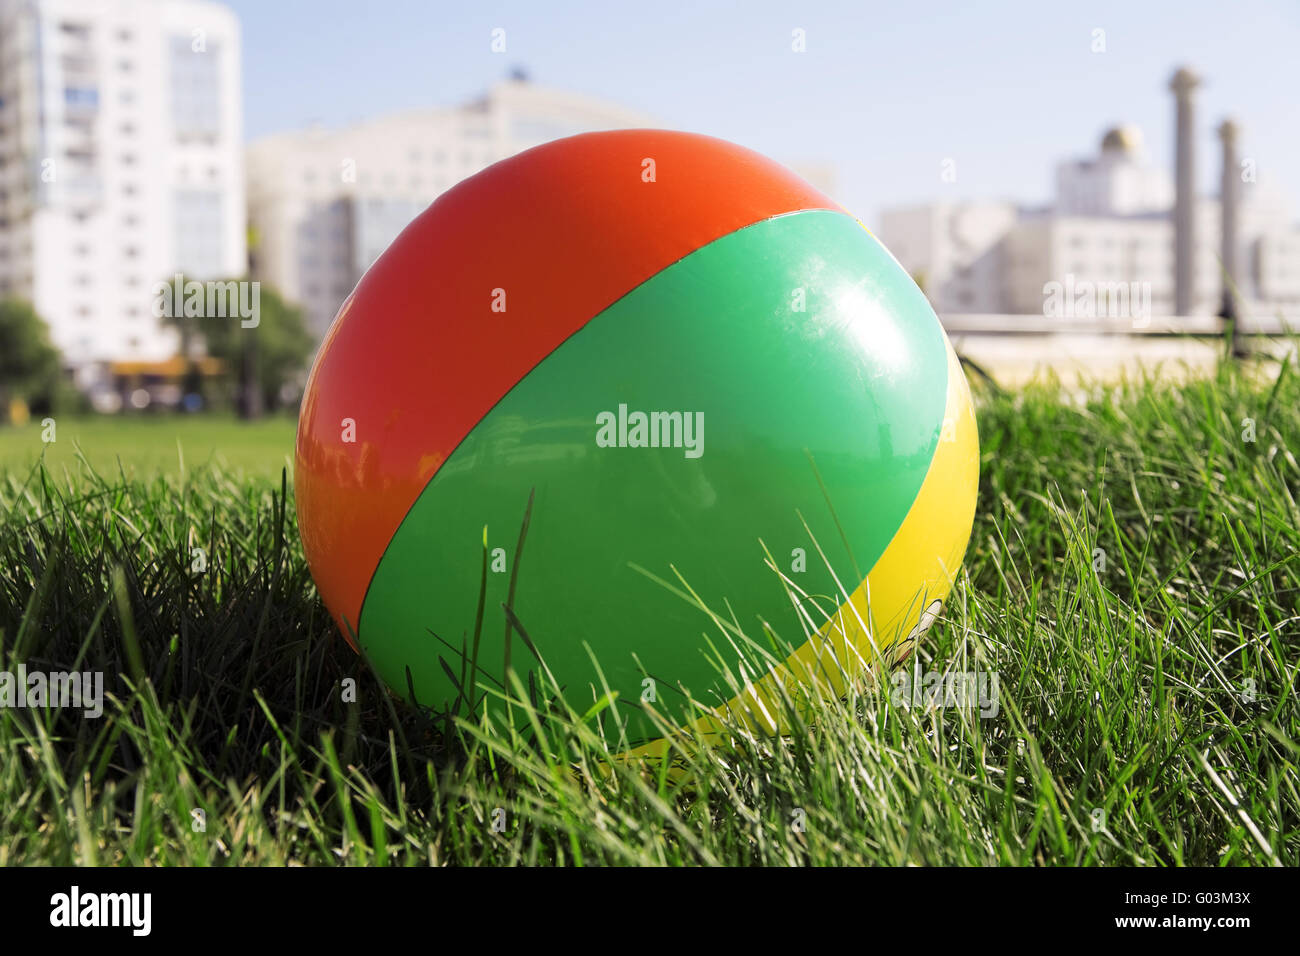 ball for outdoor games lying on grass in city park Stock Photo